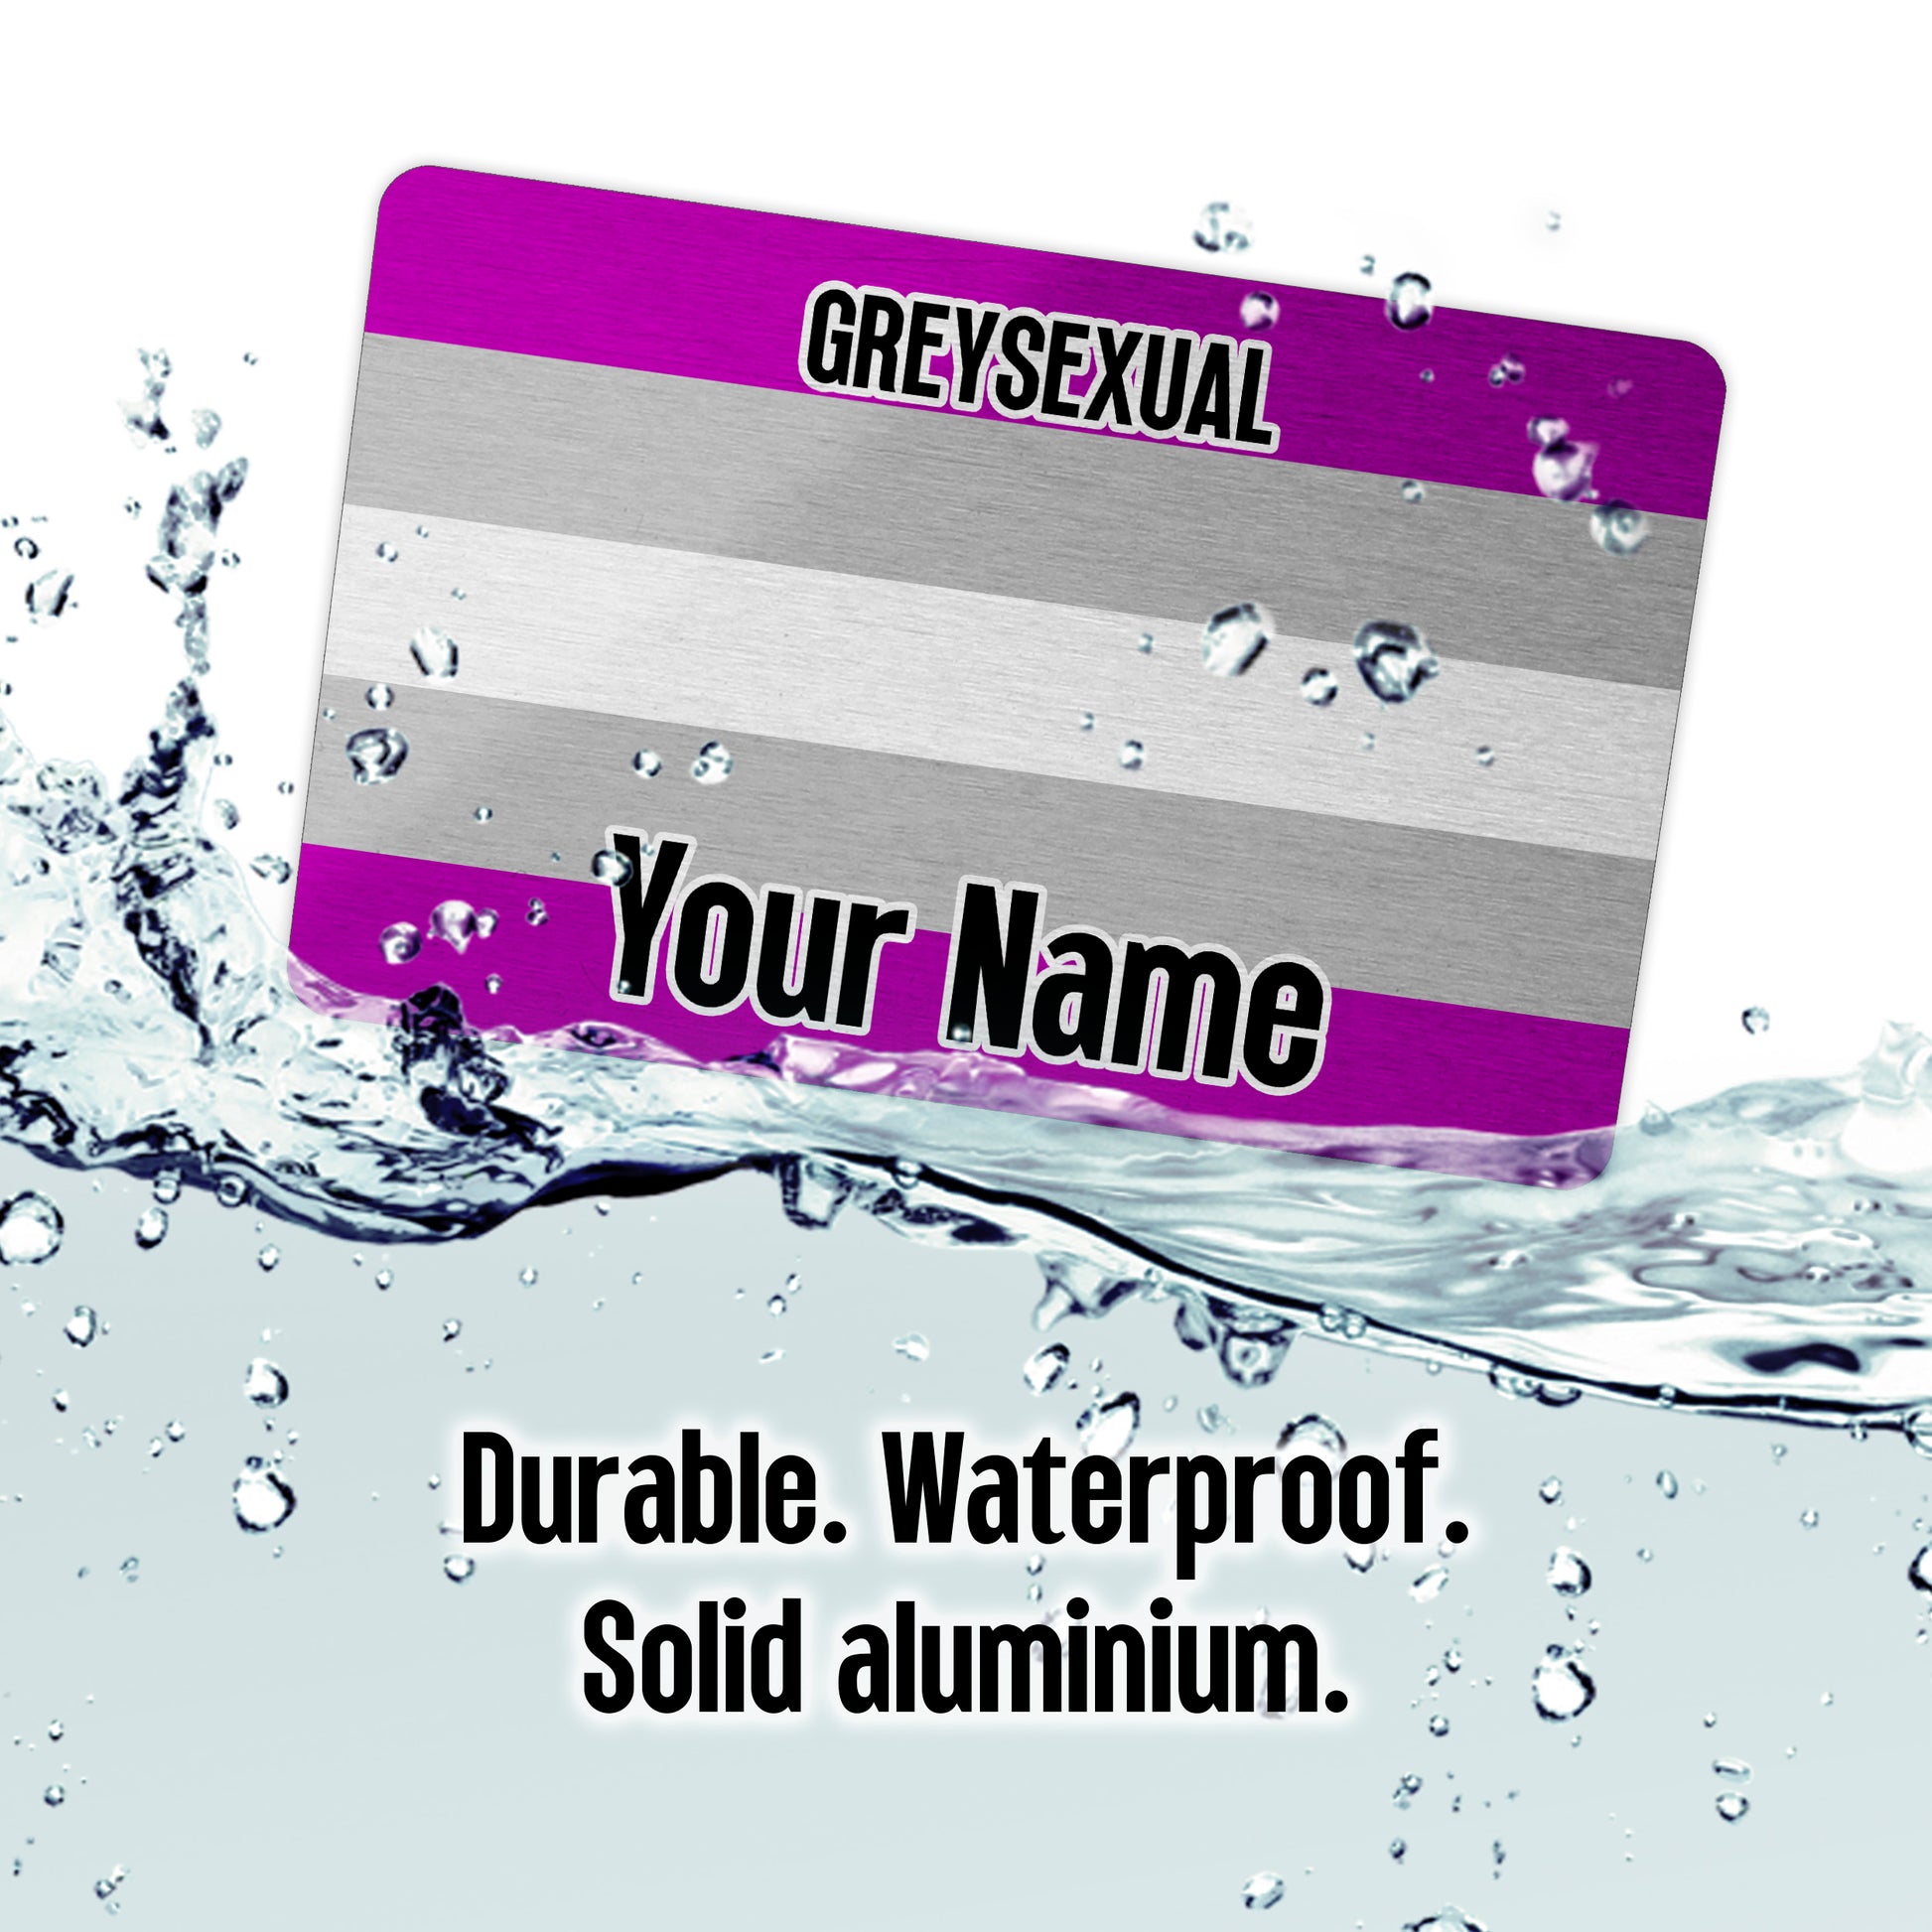 Aluminium wallet card personalised with your name and the greysexual pride flag